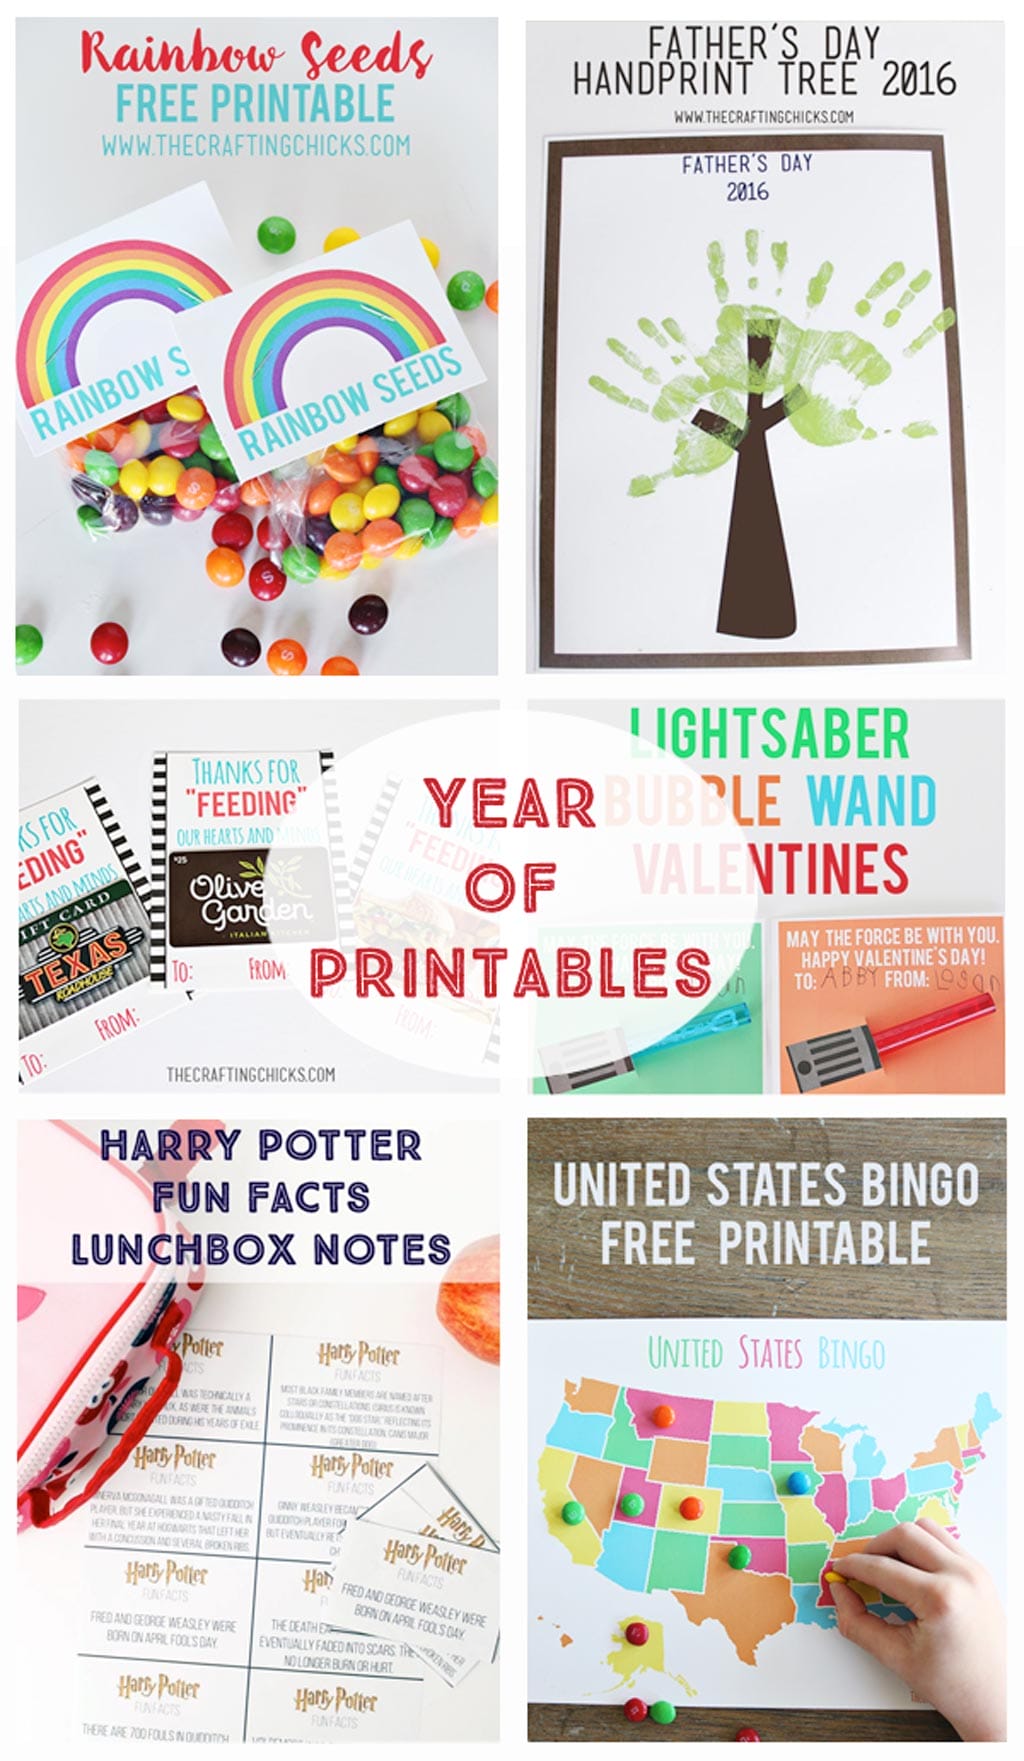 A Year of Printables - New Year, Winter, Valentines, Easter, St. Patrick's Day, Spring, Mother's Day, Father's Day, Kids, Teacher Appreciation, School Lunch Notes, Halloween, Thanksgiving, Christmas... printables for an entire year!